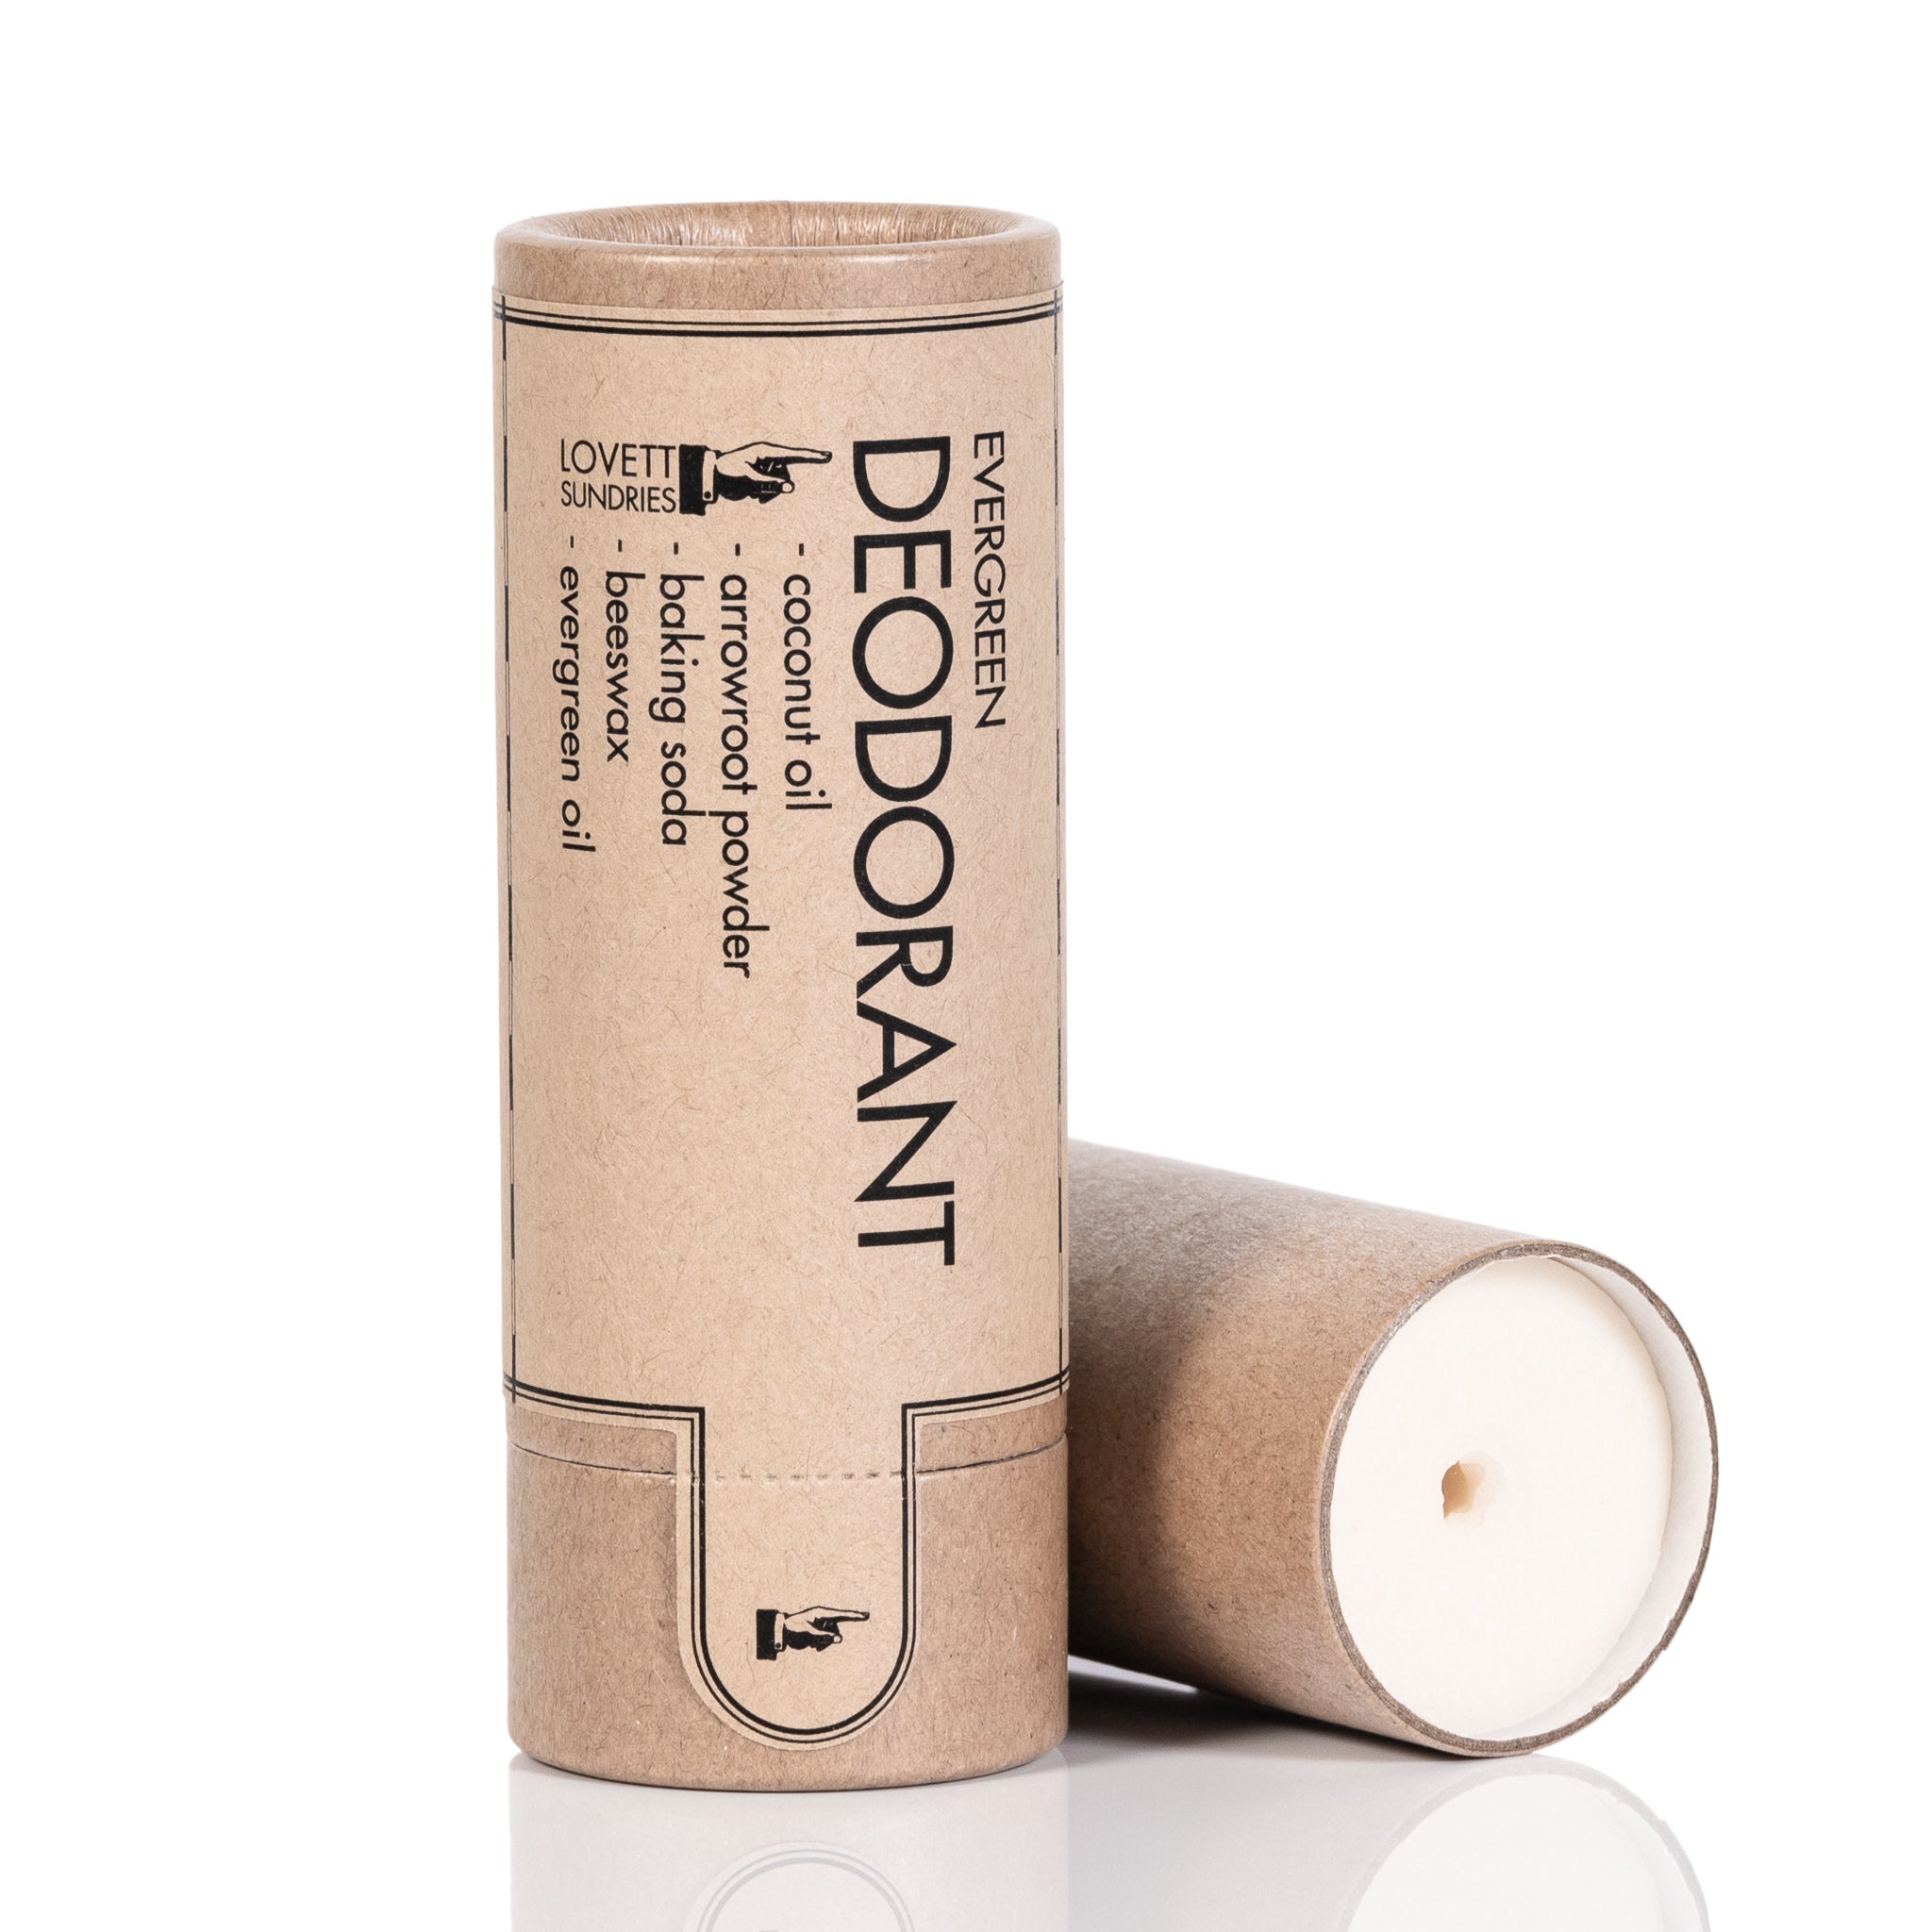 Evergreen scented aluminum-free deodorant in a recyclable contain.